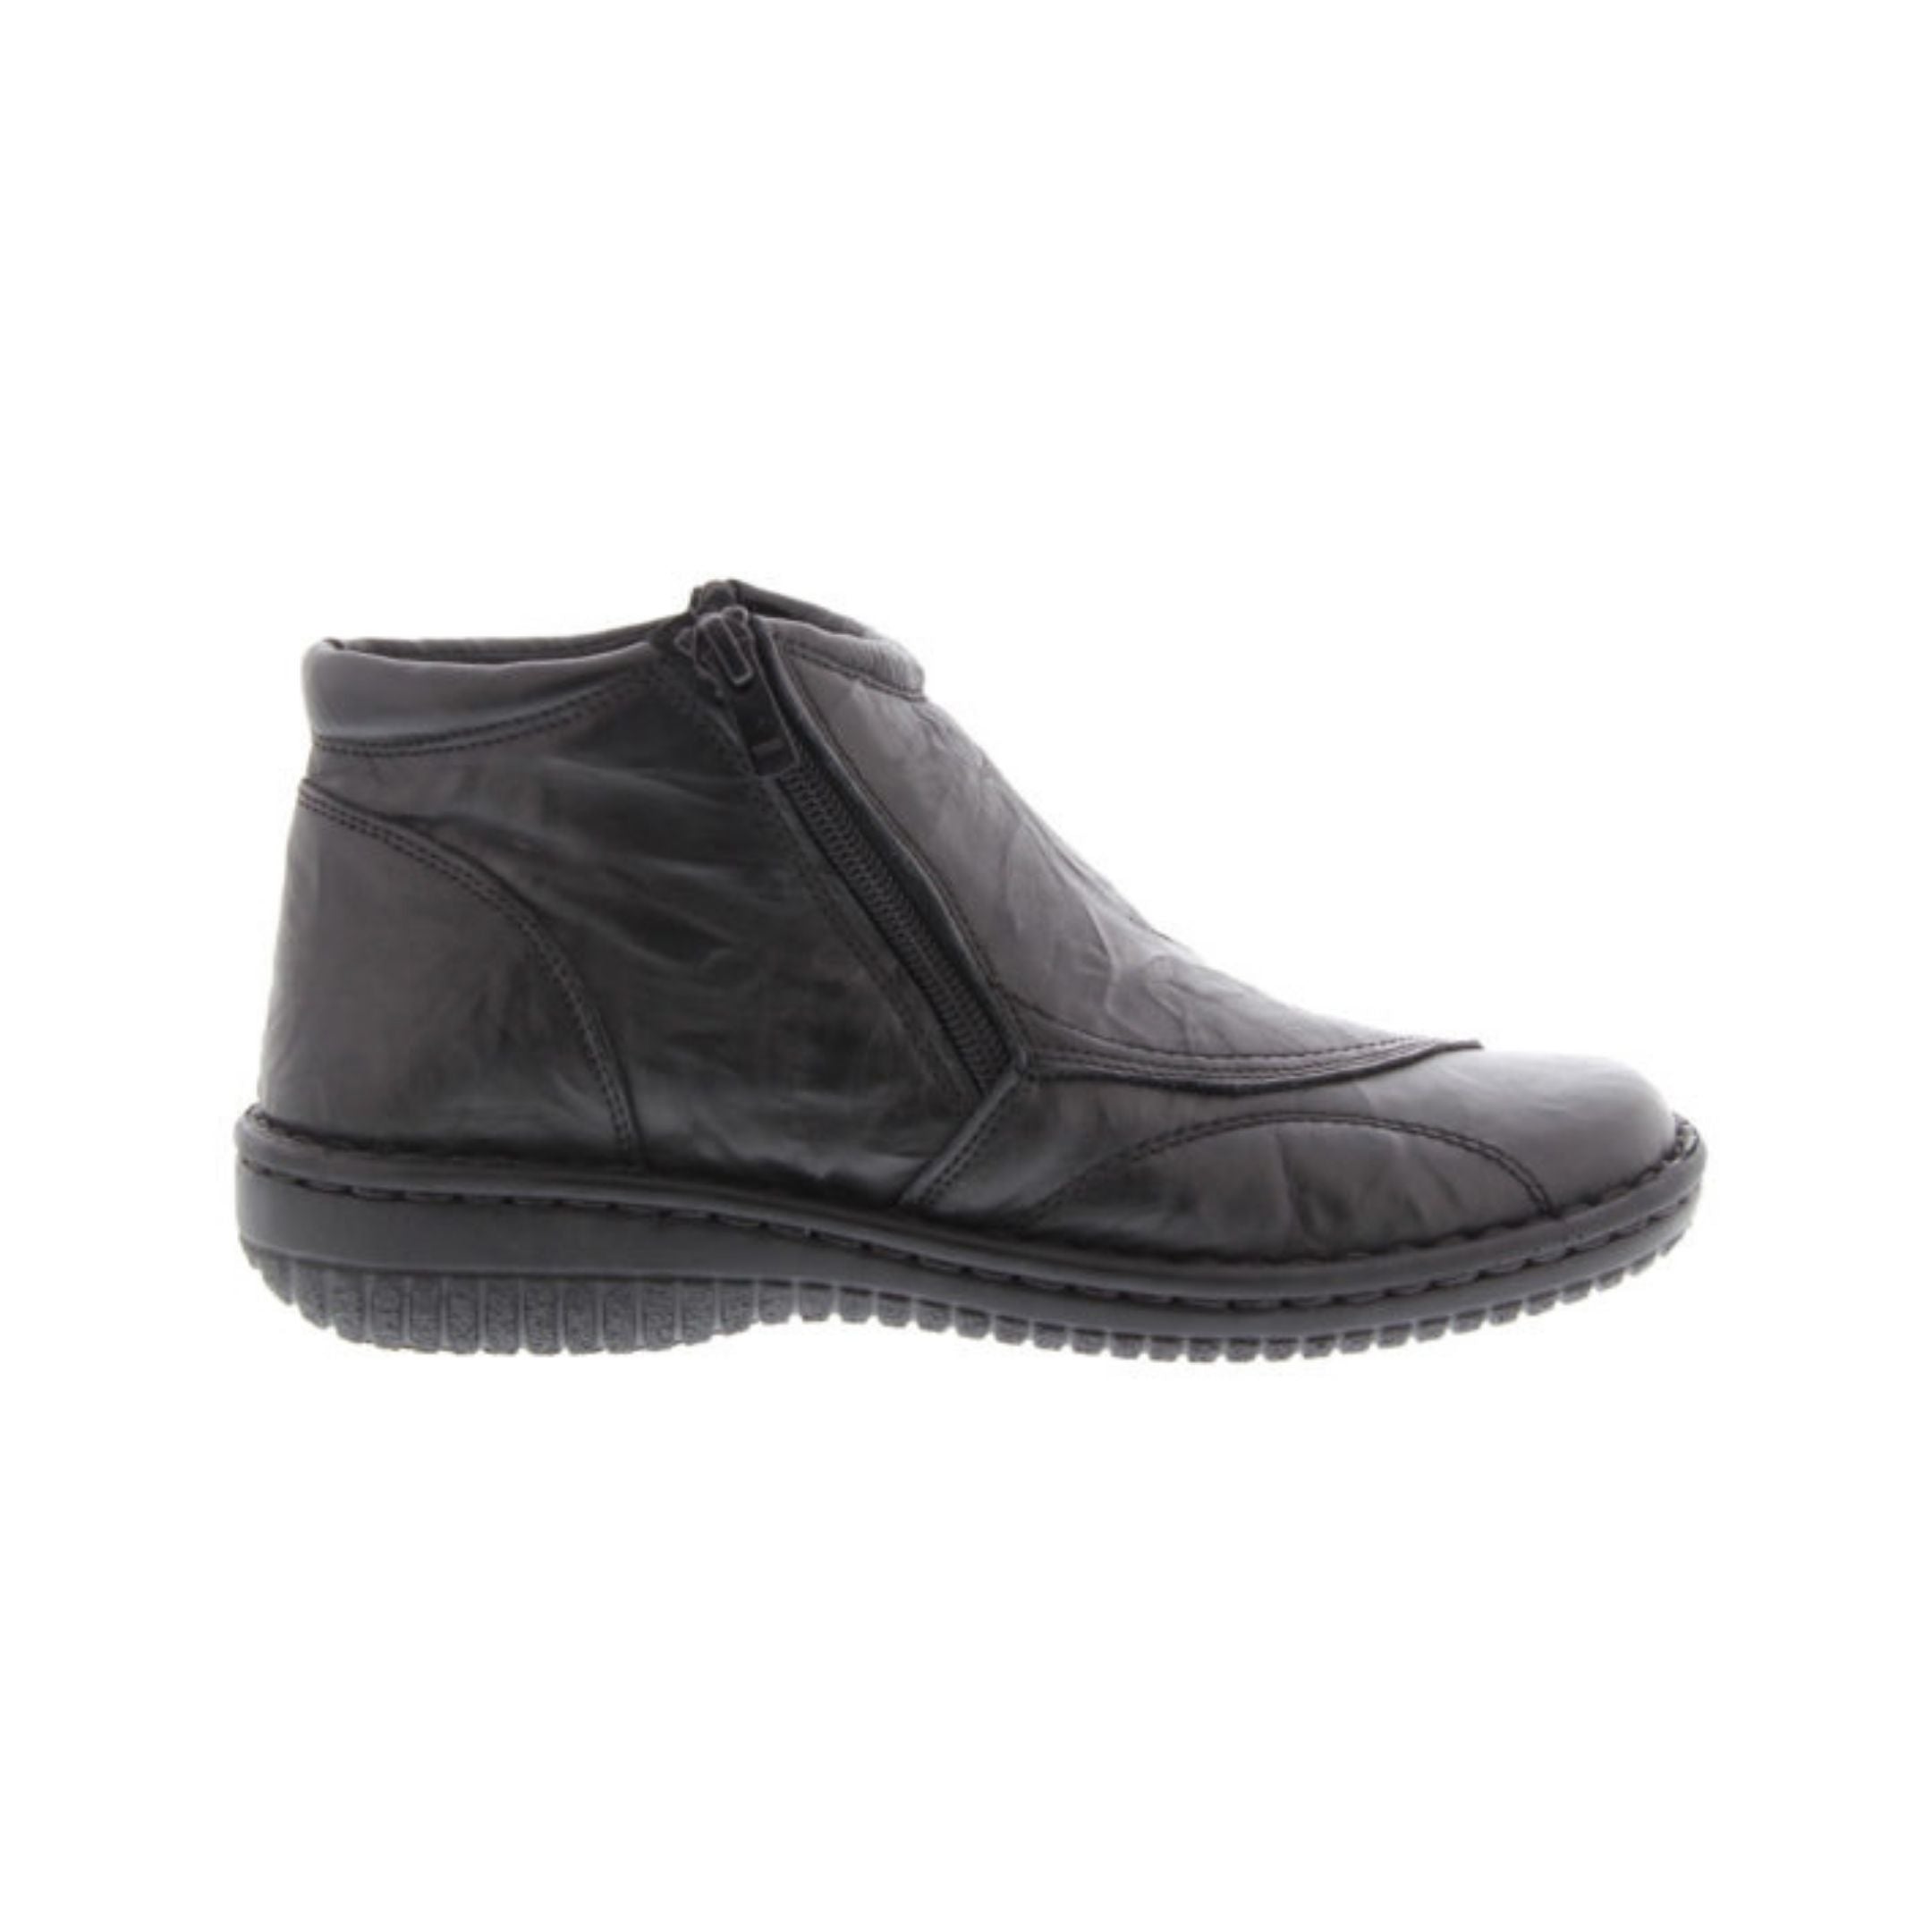 Side view of Black Alb ankle boot by Volks Walkers with soft textured upper and side zipper